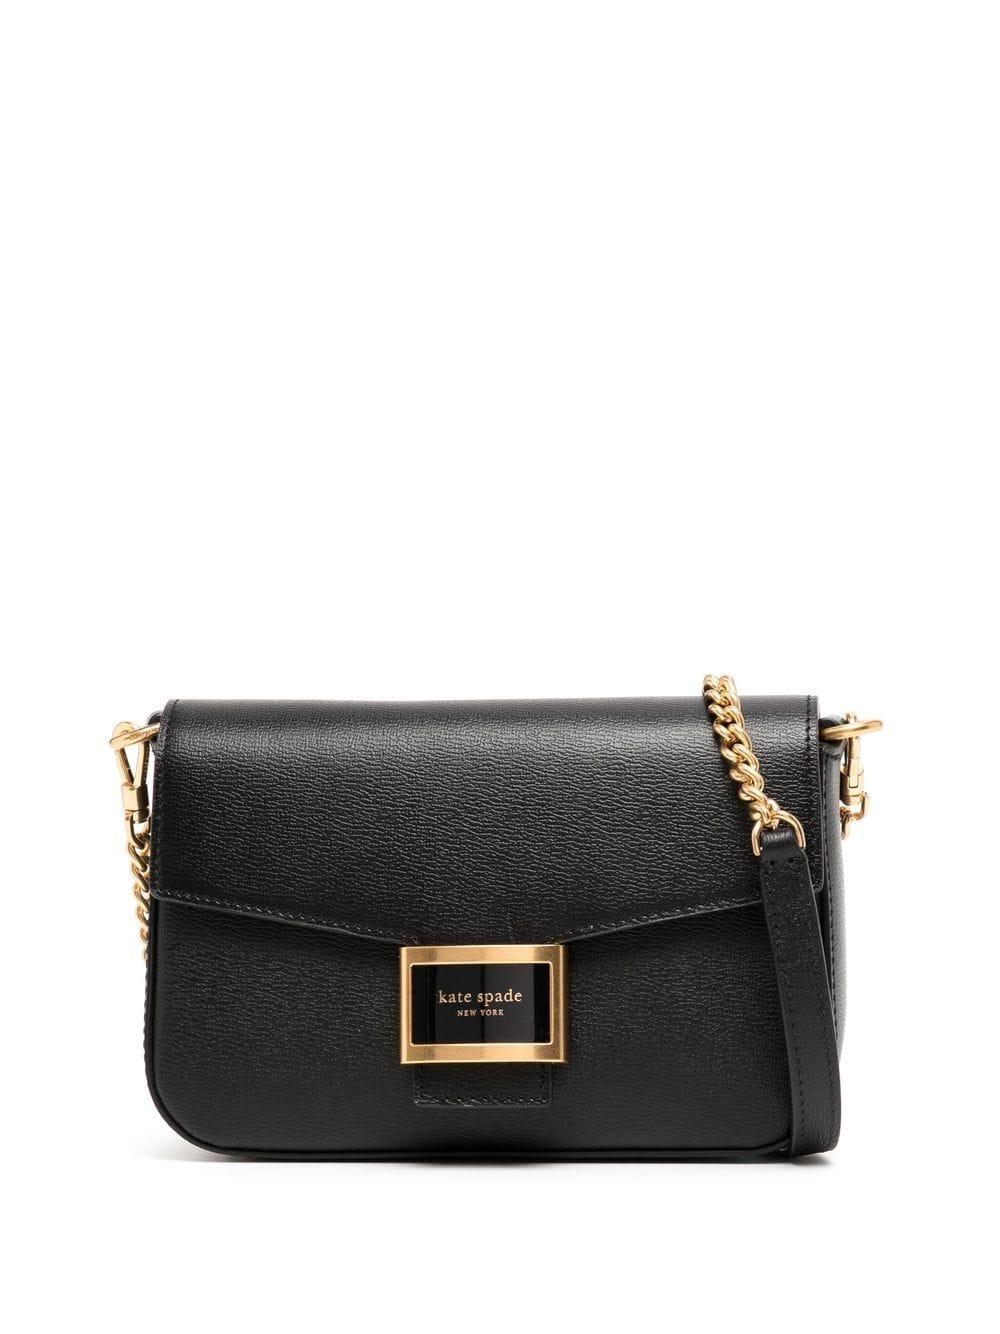 Kate Spade Katy Textured Leather Chain Strap Cross Body Bag in Black ...